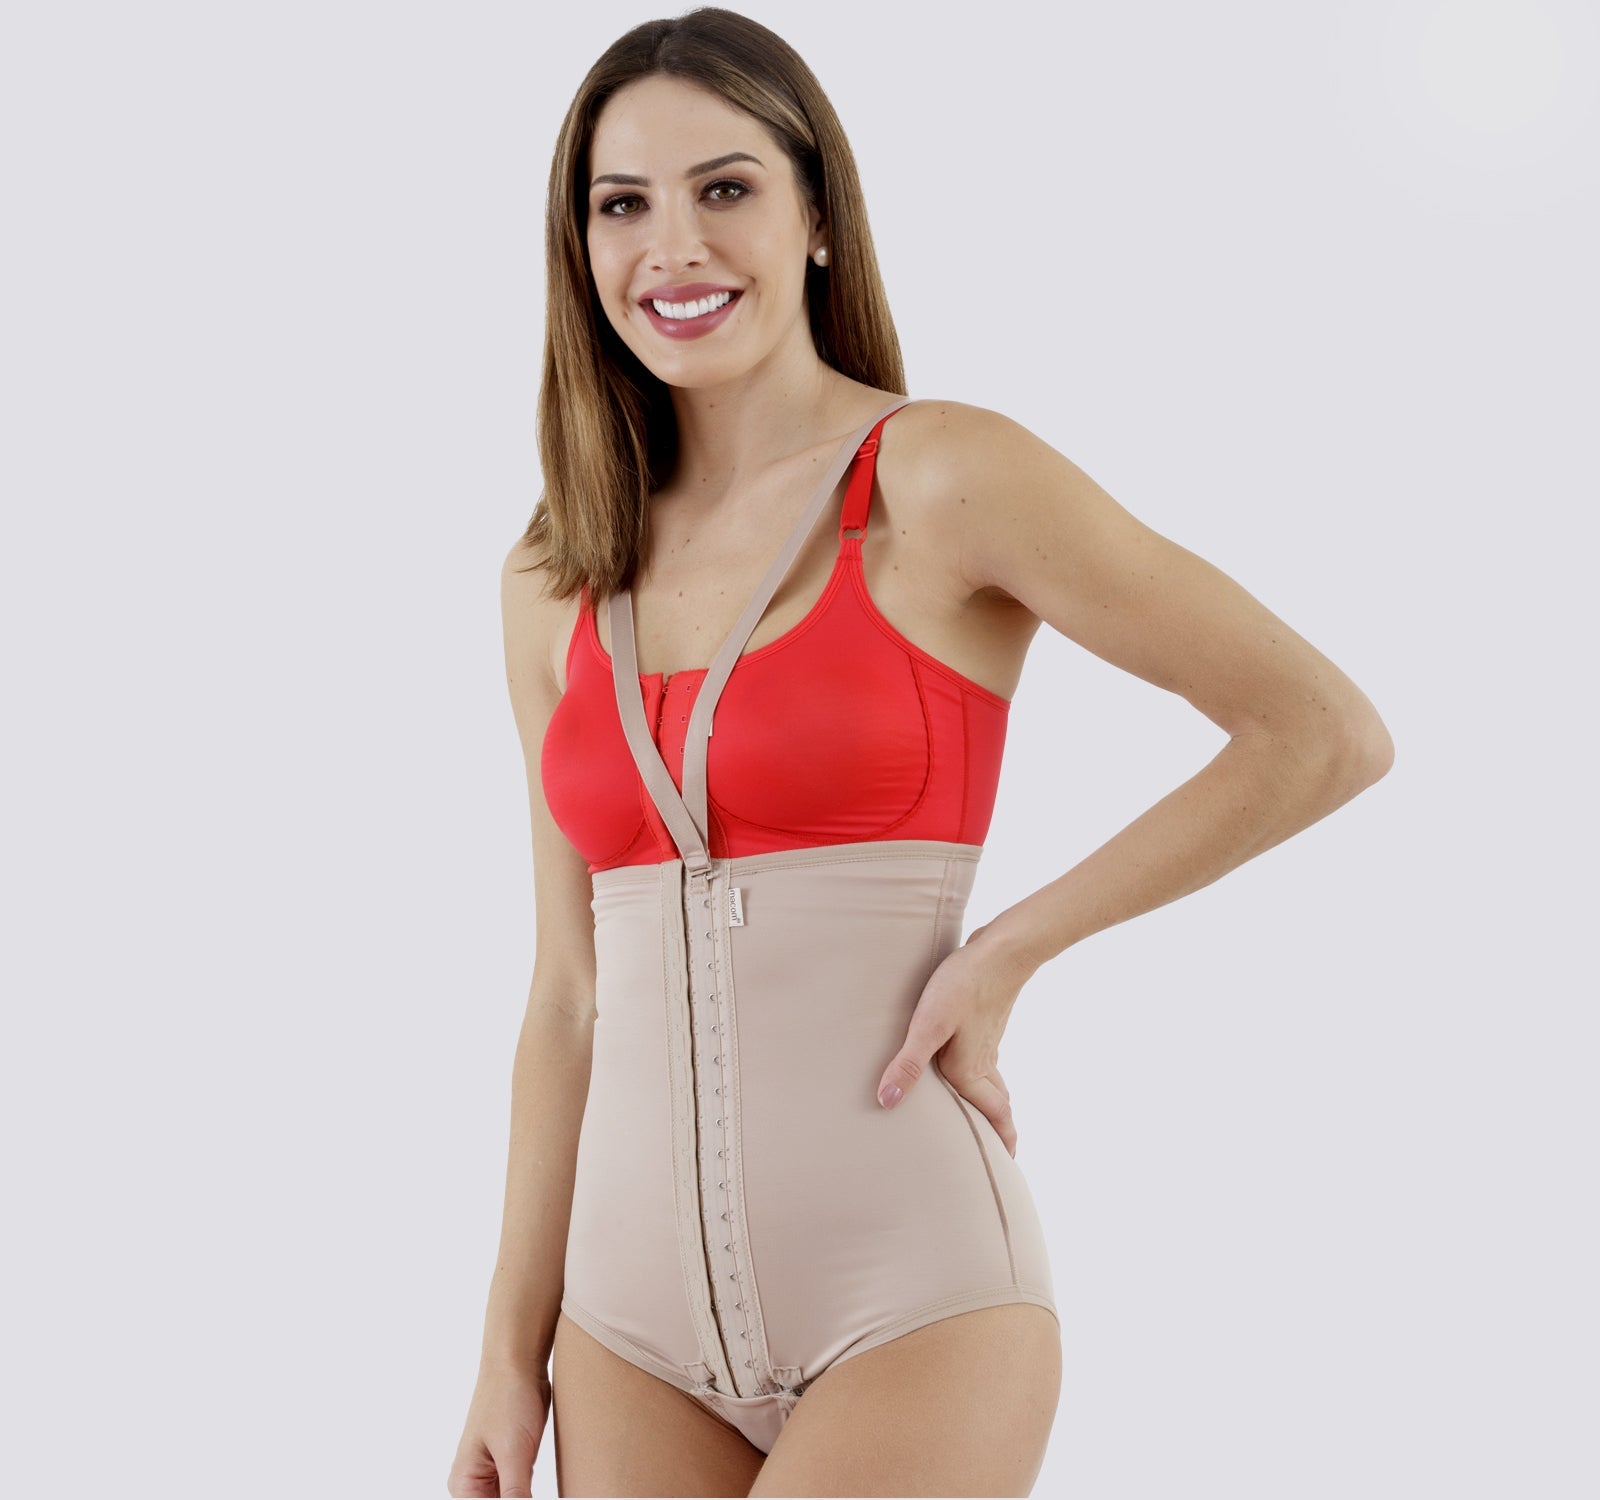 Post Surgical Garments - Best Compression Girdles